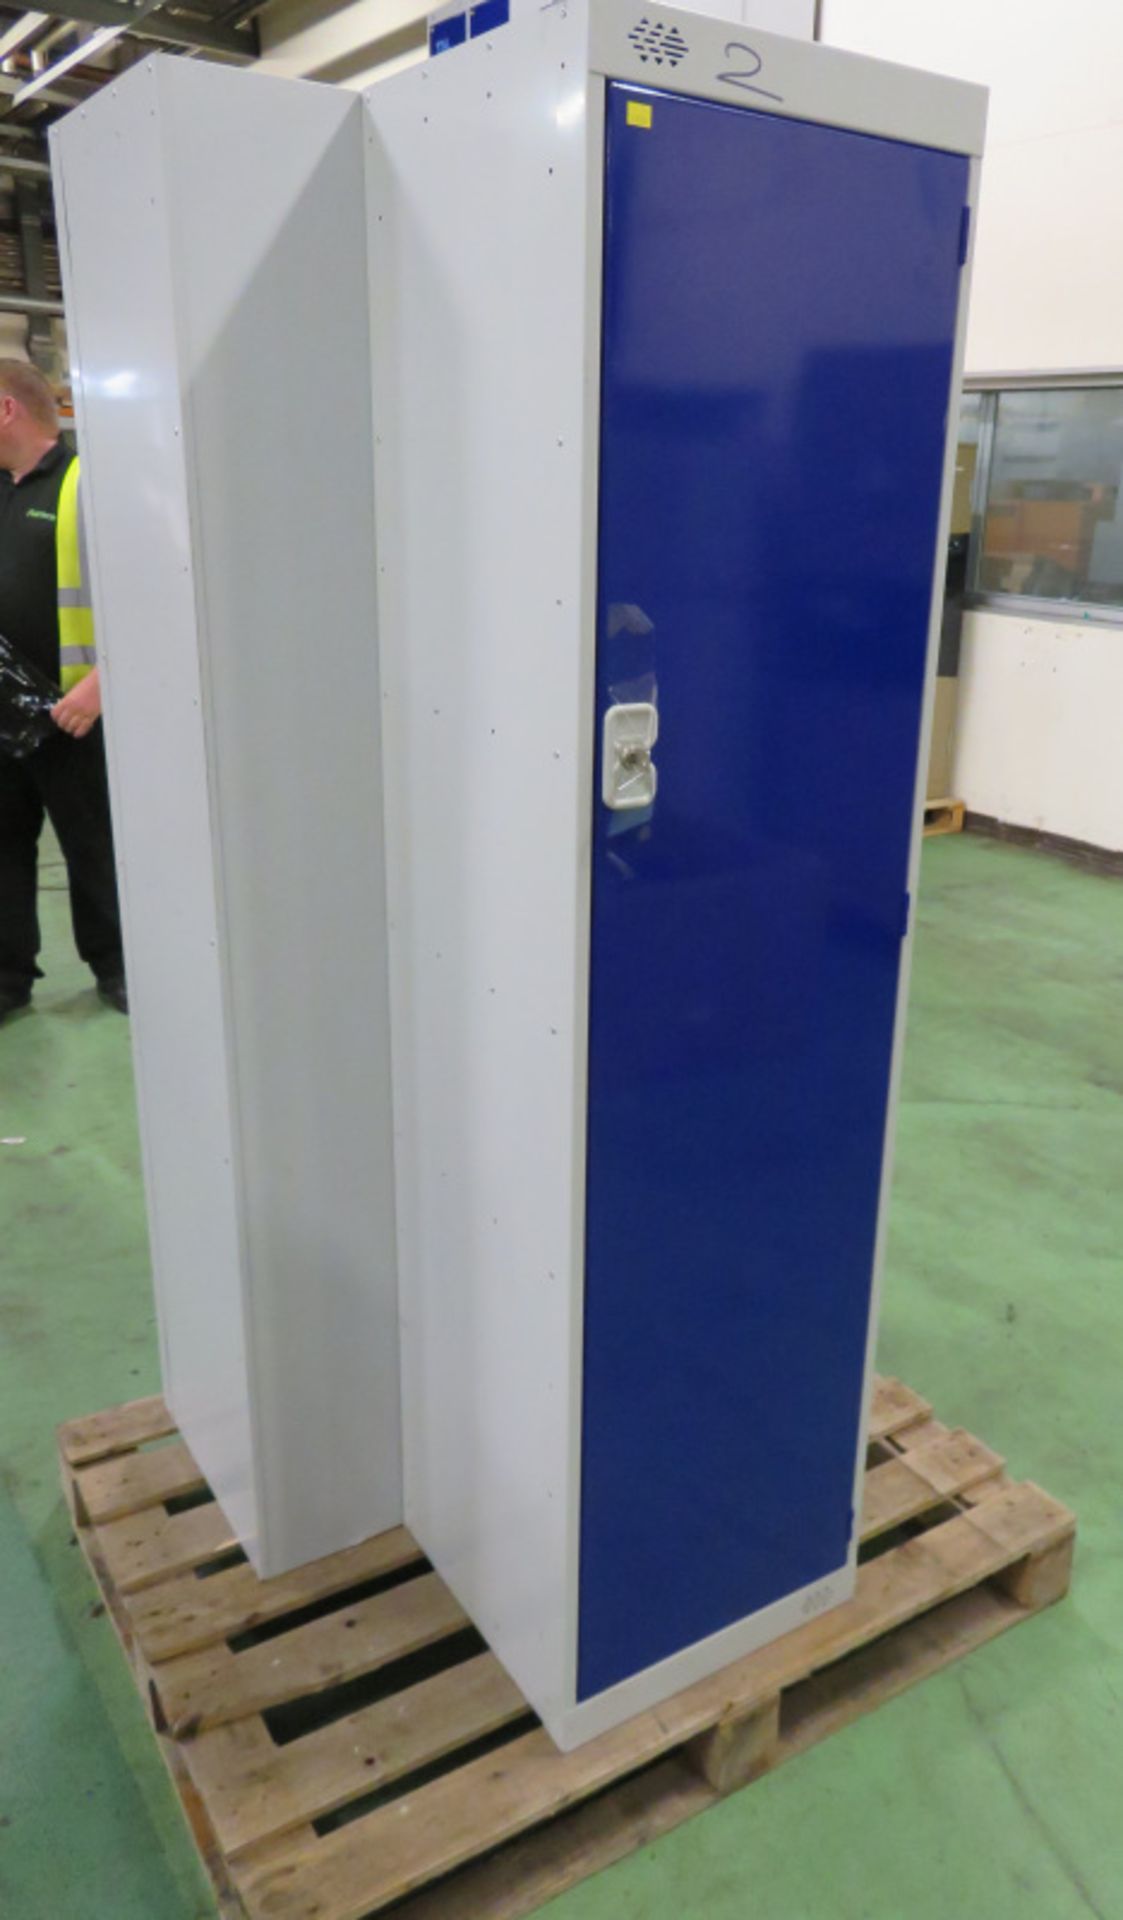 3x Metal Grey / Blue Lockers L 450mm x W 450mm x H1800mm - Image 5 of 6